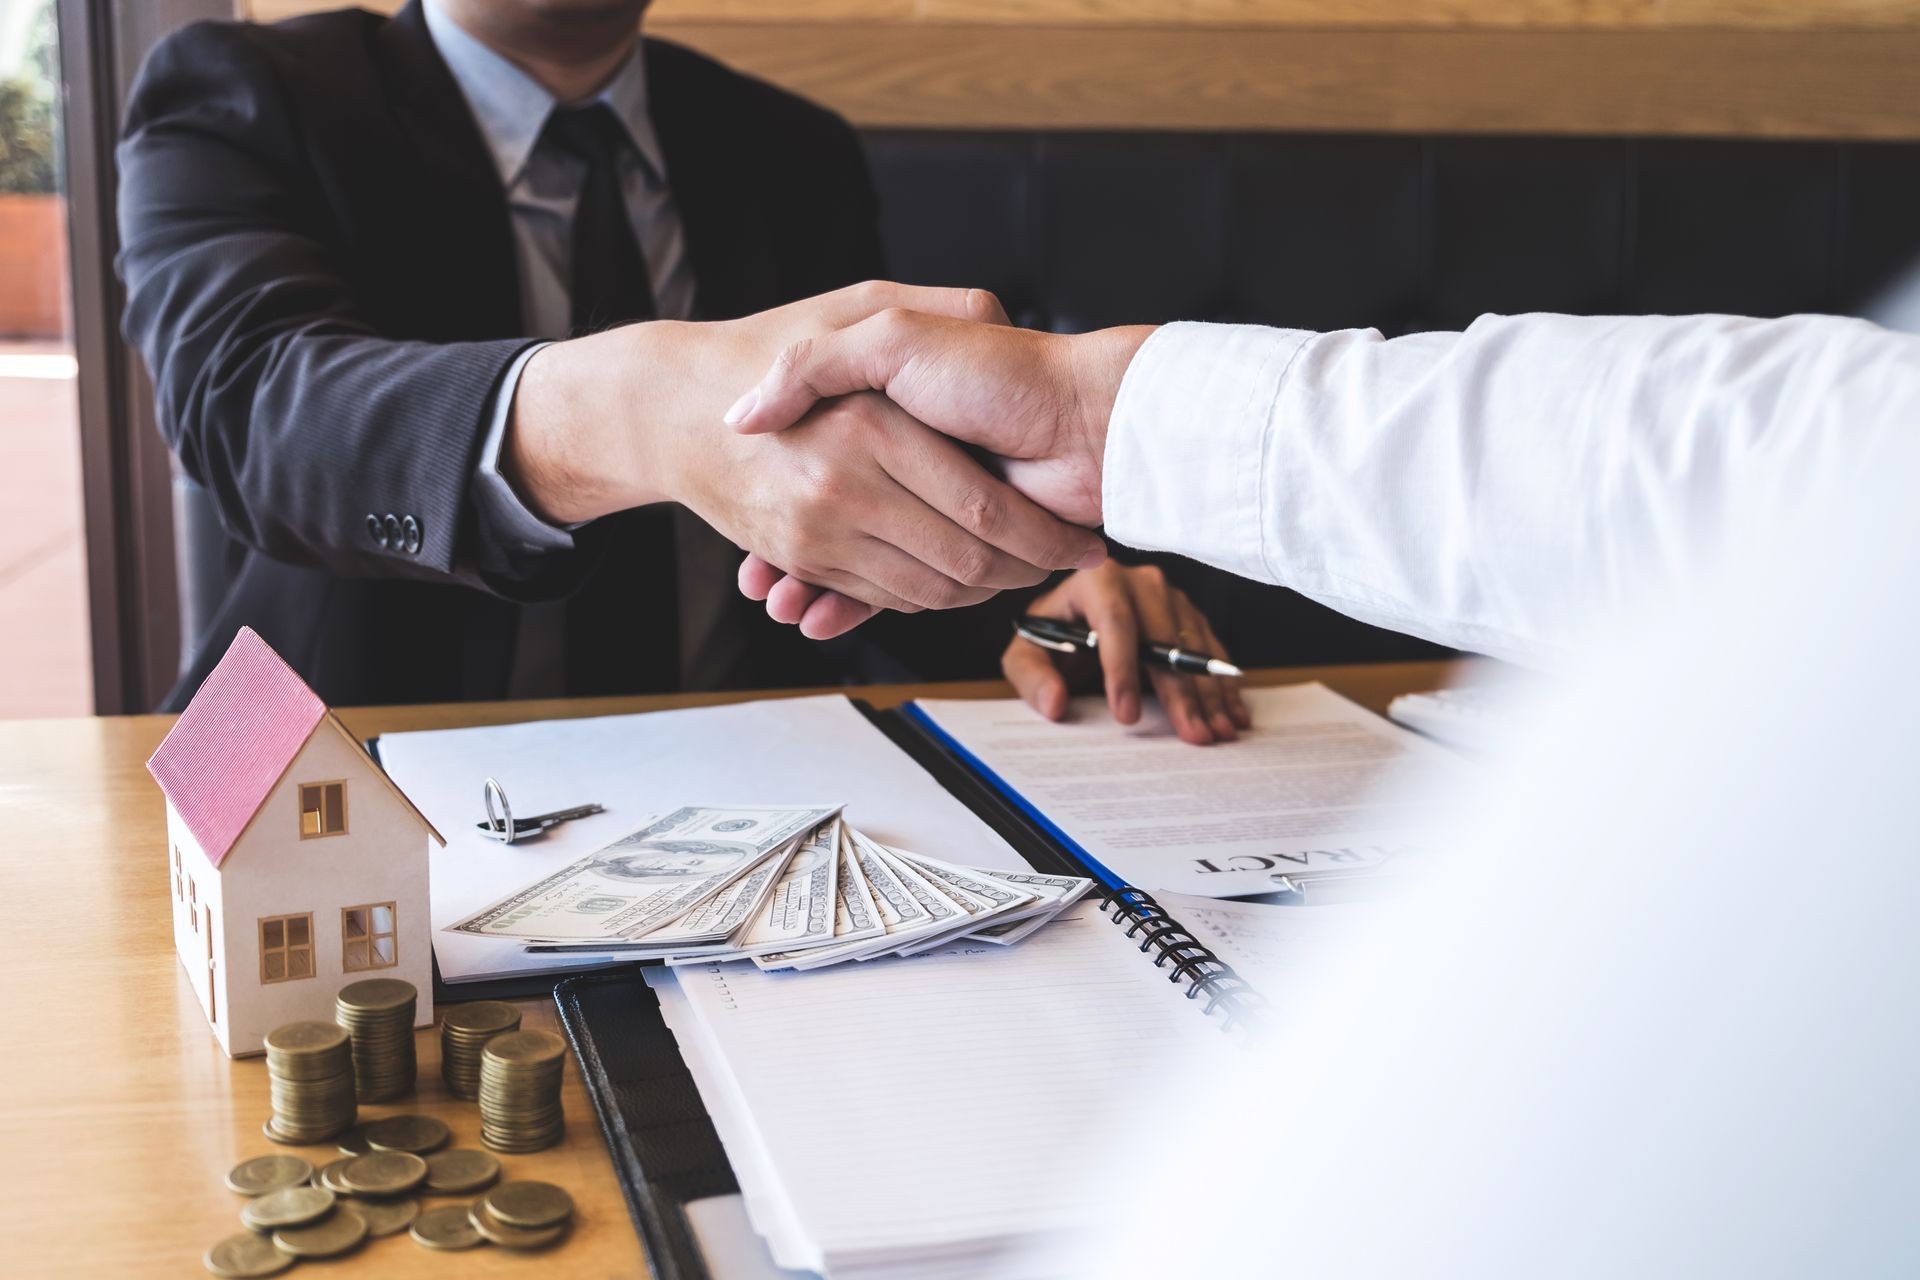 Image of successful deal of real estate, Broker and client shaking hands after signing contract approved application form, concerning mortgage loan offer for and house insurance.